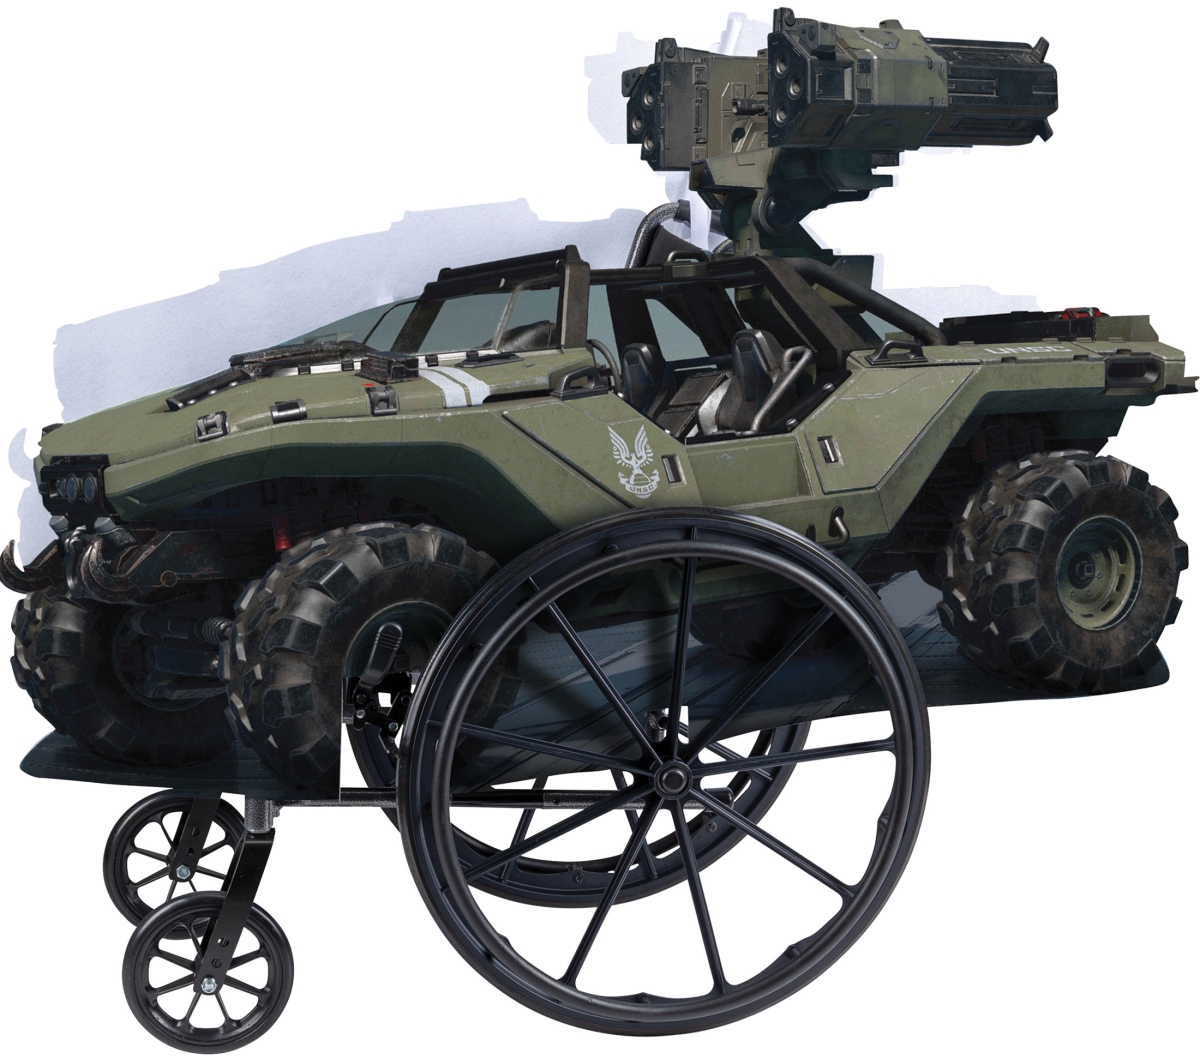 Picture of Disguise DG128519 Halo Infinite Warthog Adaptive Wheelchair